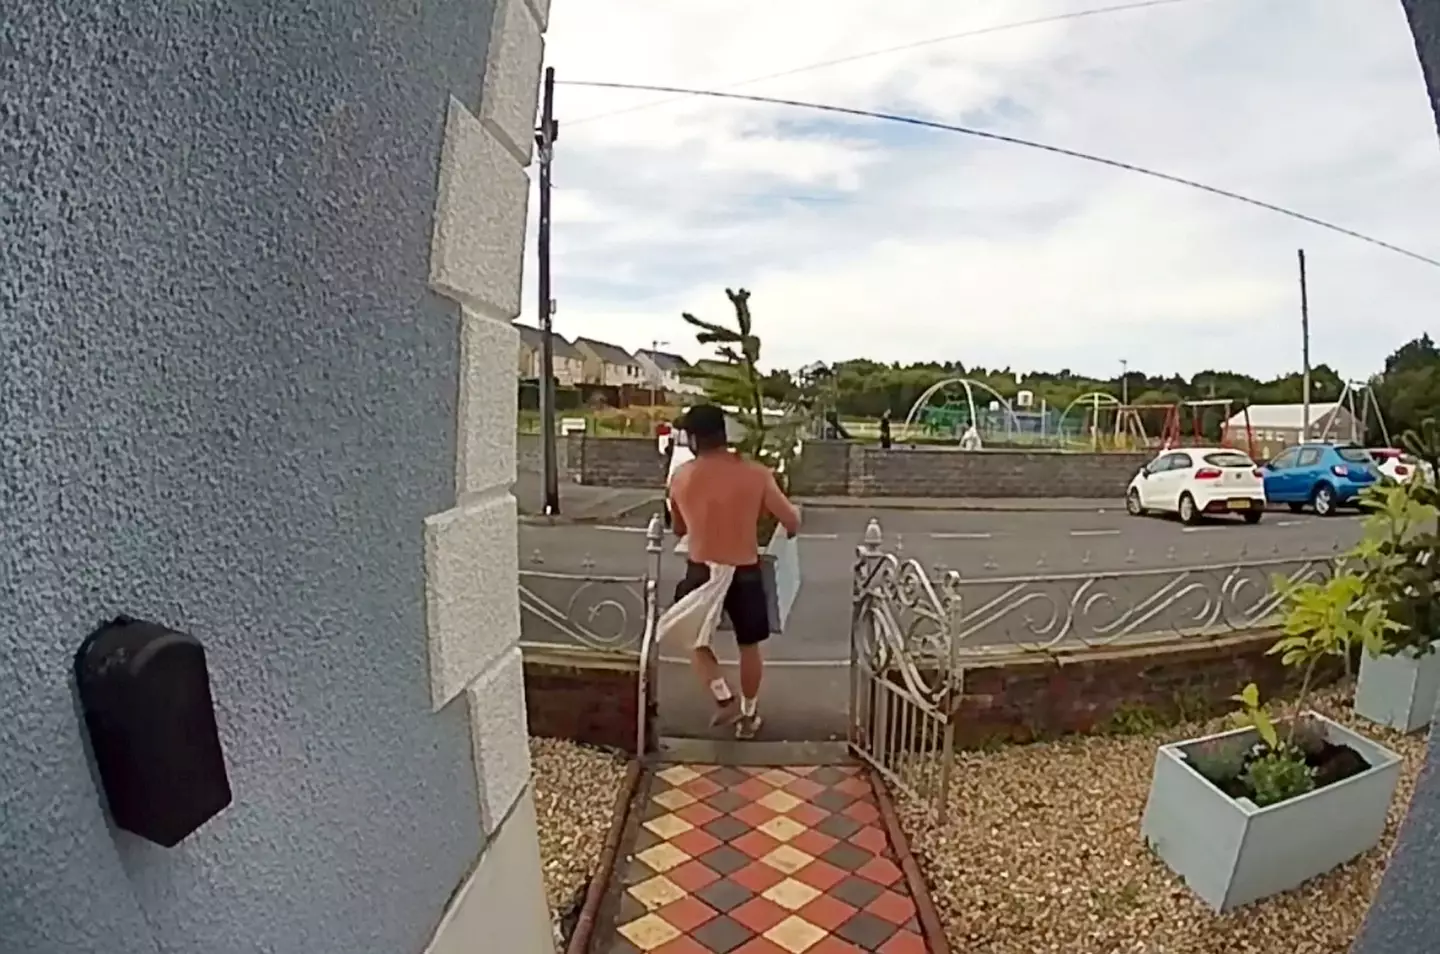 The man was caught stealing the plant on a doorbell camera.